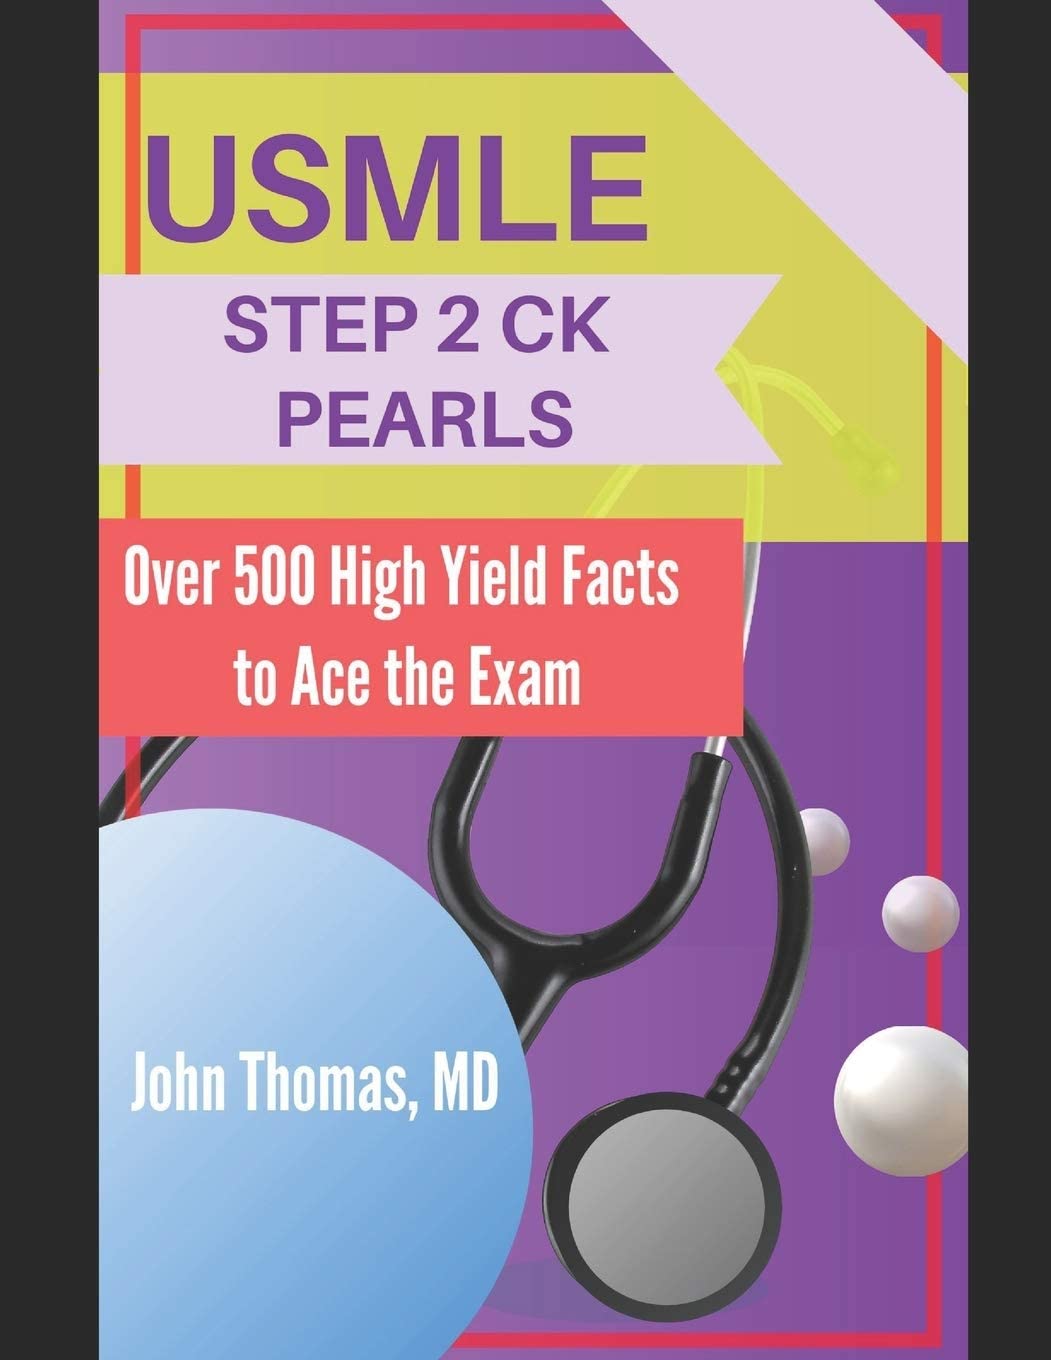 USMLE STEP 2 CK PEARLS: Over 500 High Yield Facts to Ace the Exam